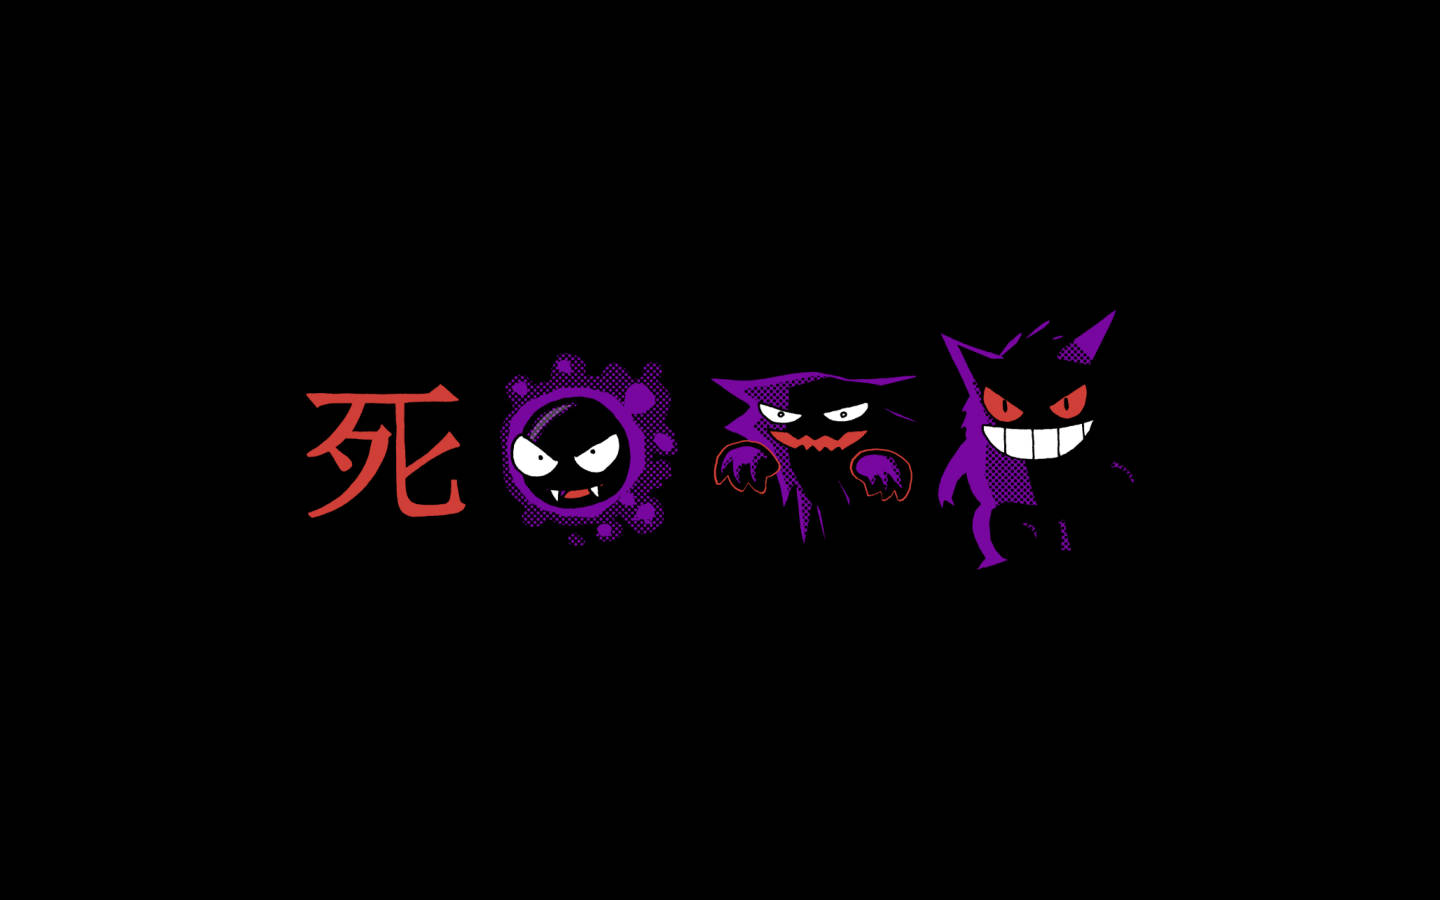 Show Your Power! Evolution Of The Powerful Gengar.